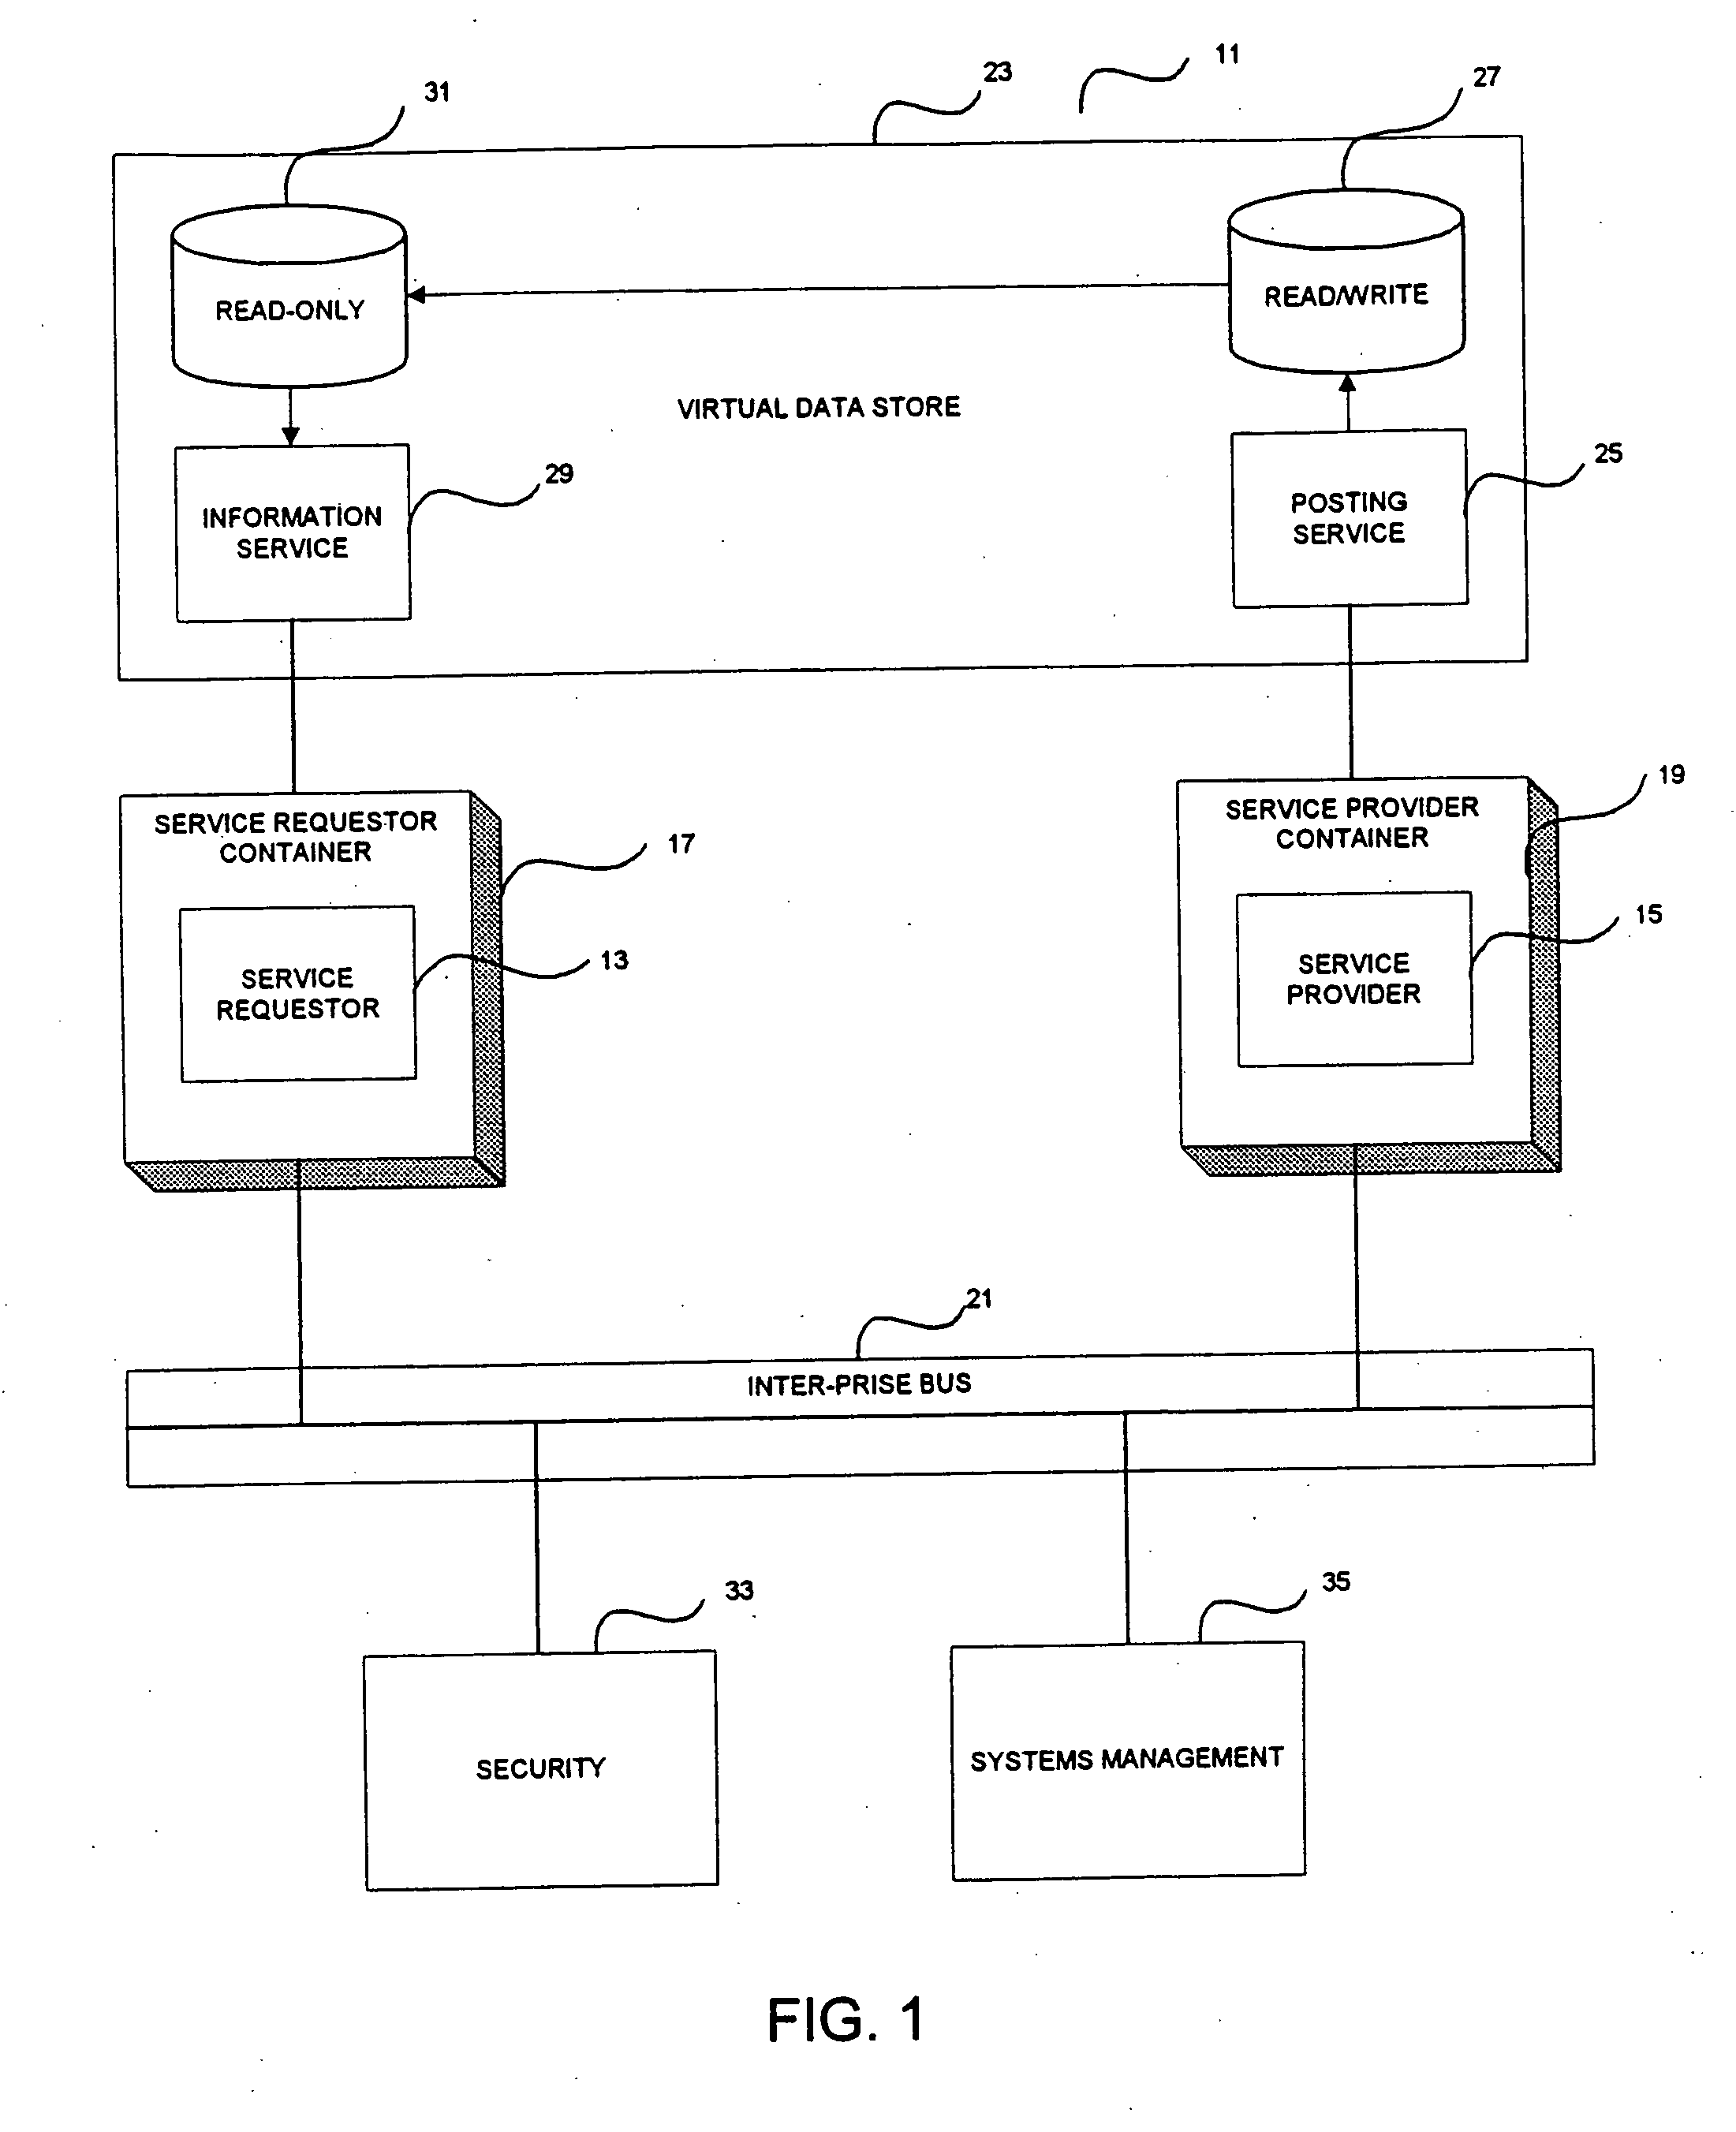 Distributed computing system architecture